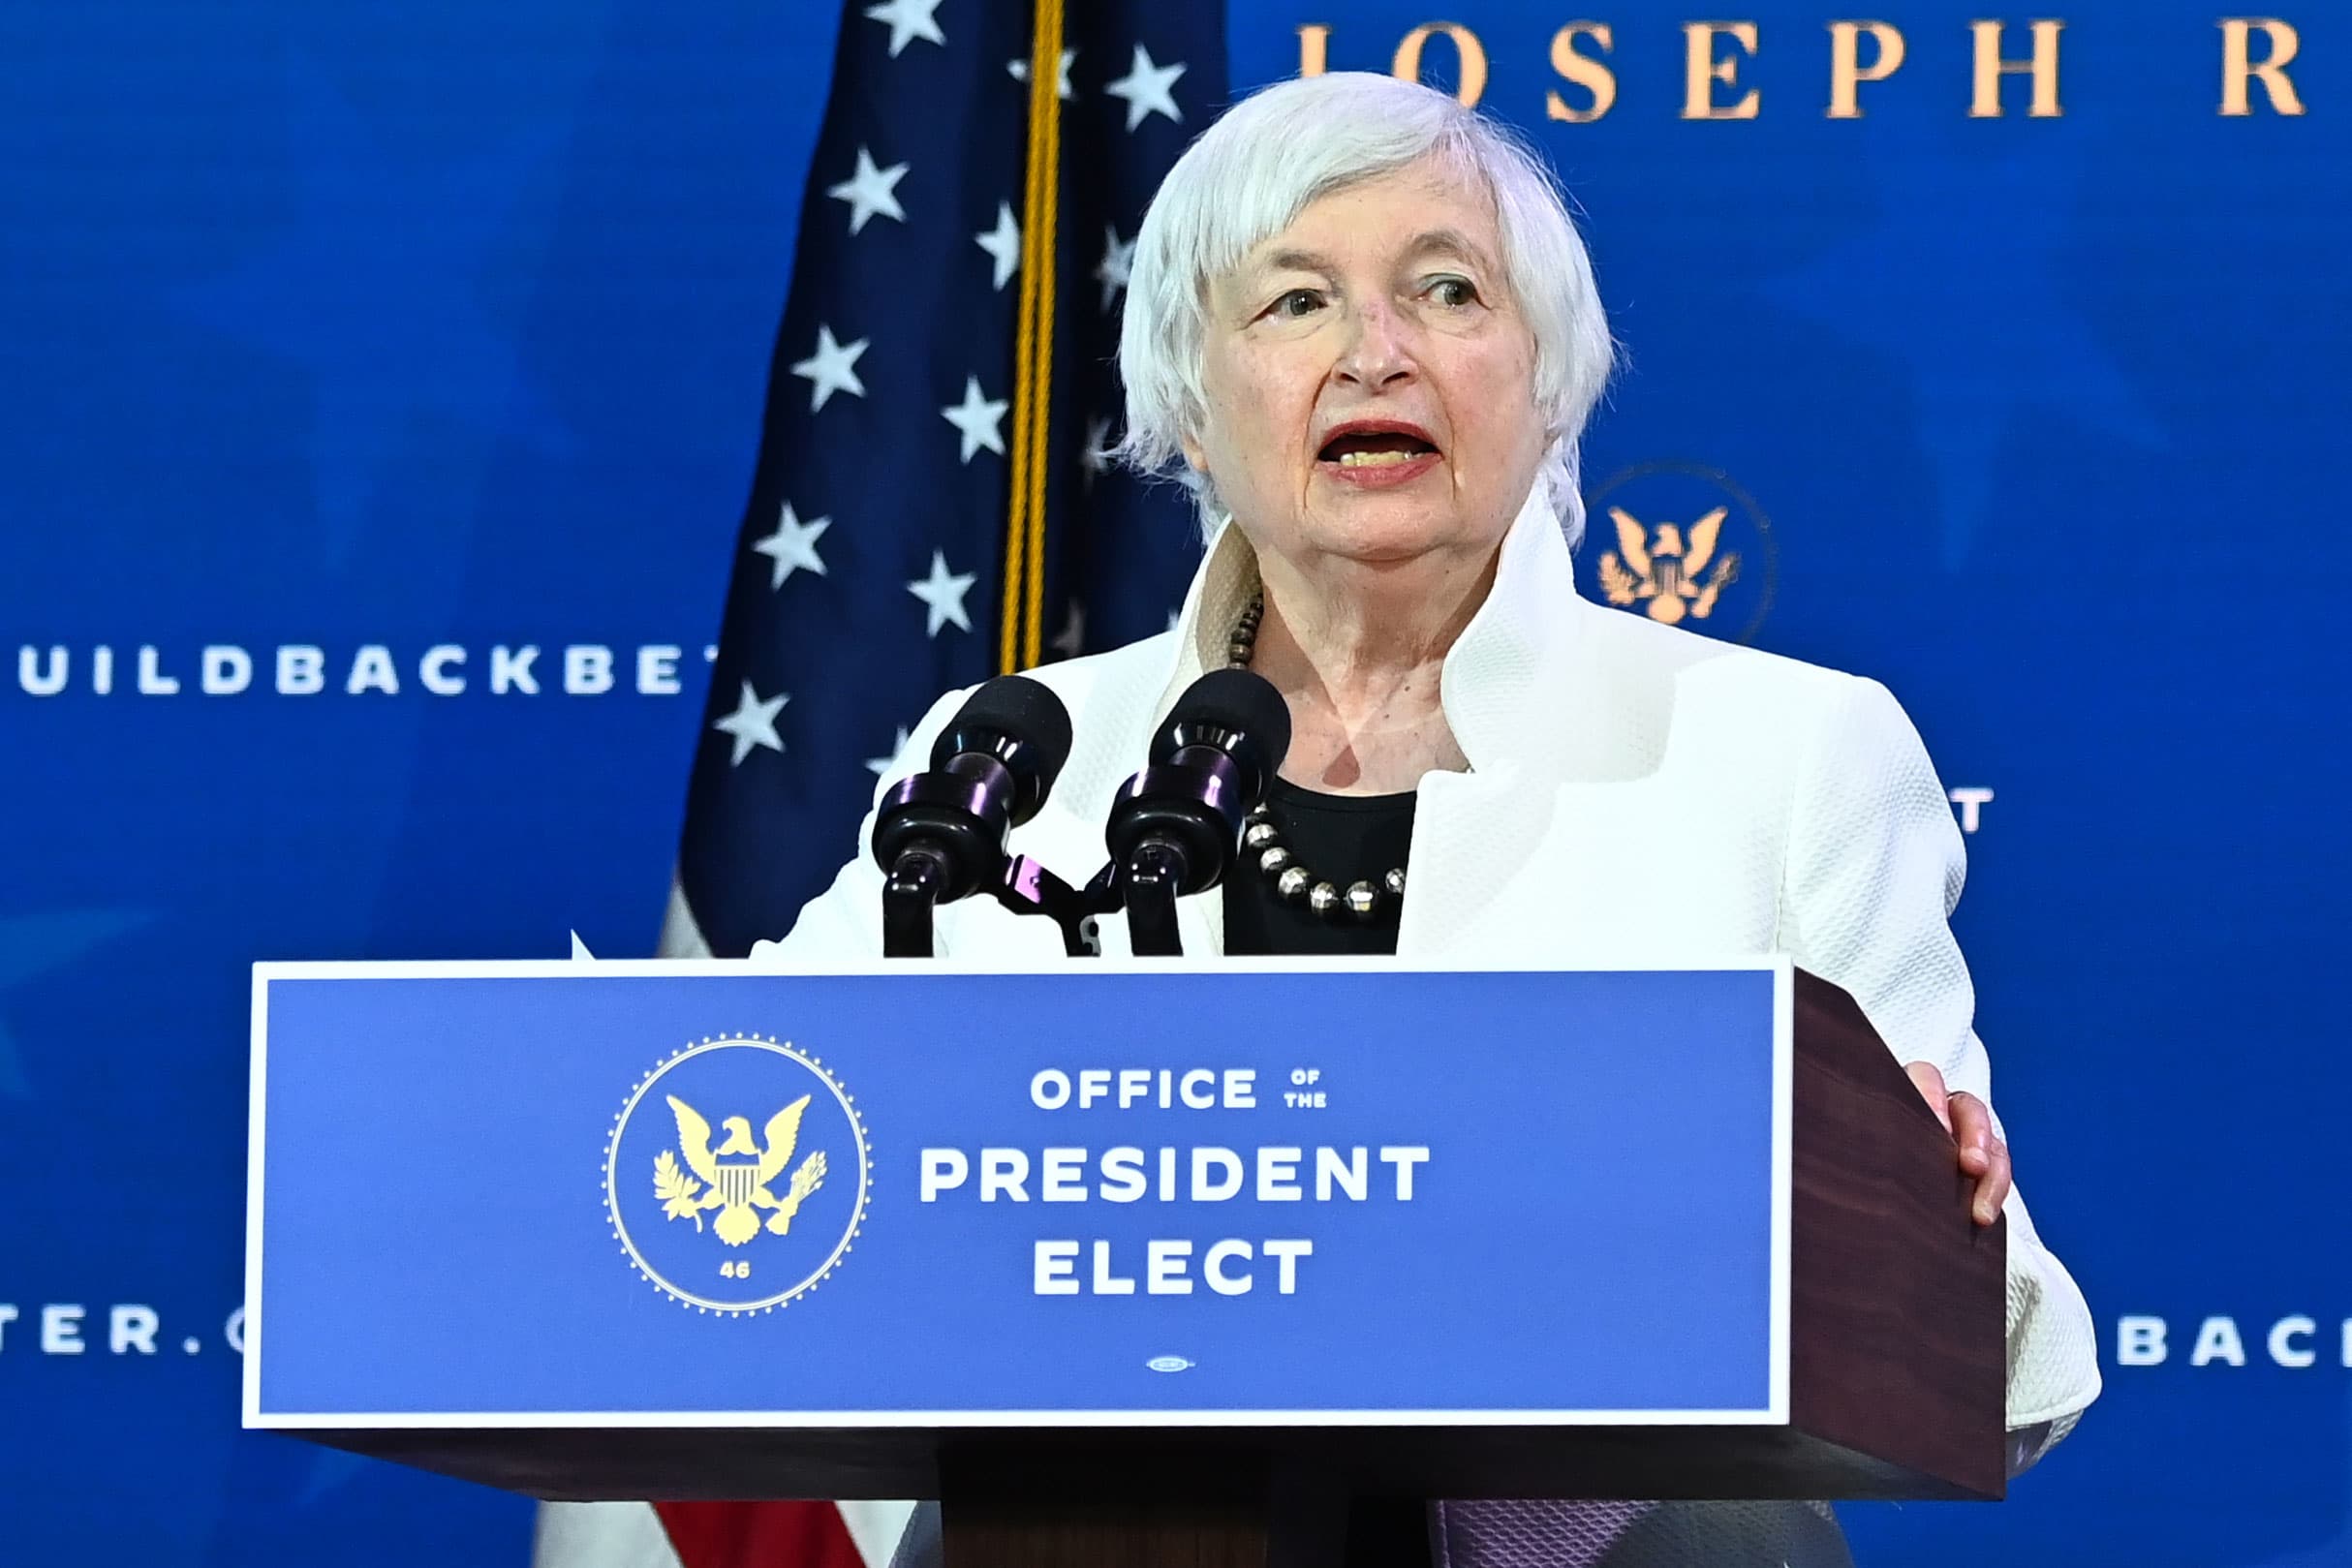 Janet Yellen receives confirmation from the Senate as the first woman to head the Treasury Department